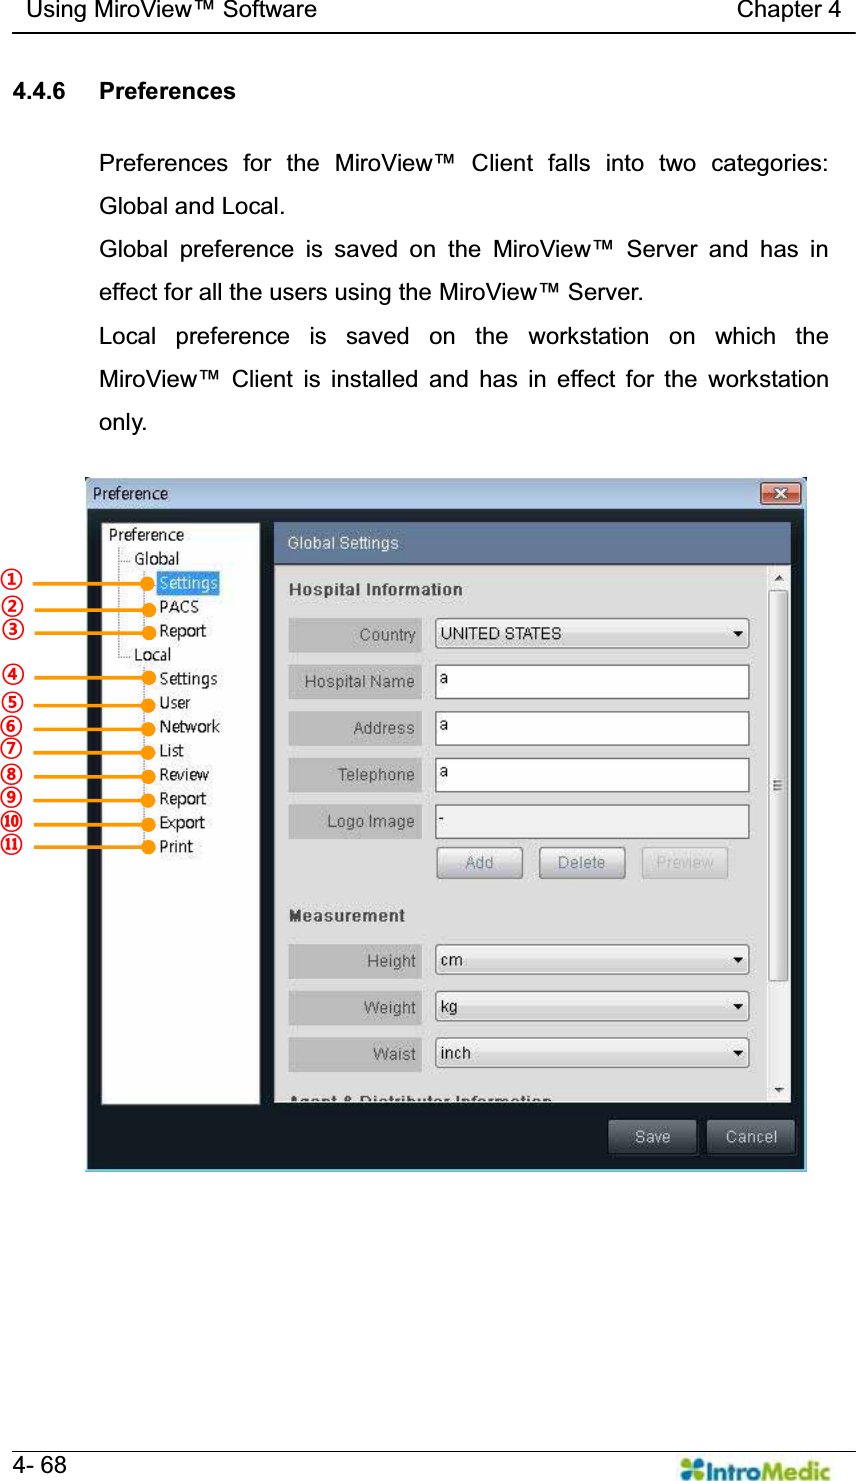   Using MiroView Software                                   Chapter 4   4- 68 4.4.6 Preferences  Preferences for the 0LUR9LHZ Client falls into two categories: Global and Local. Global preference is saved on the 0LUR9LHZ Server and has in effect for all the users using the 0LUR9LHZServer. Local preference is saved on the workstation on which the 0LUR9LHZ Client is installed and has in effect for the workstation only.     ¢ £ ¤ ¥ ¦ § ¨ © ª « ¬ 